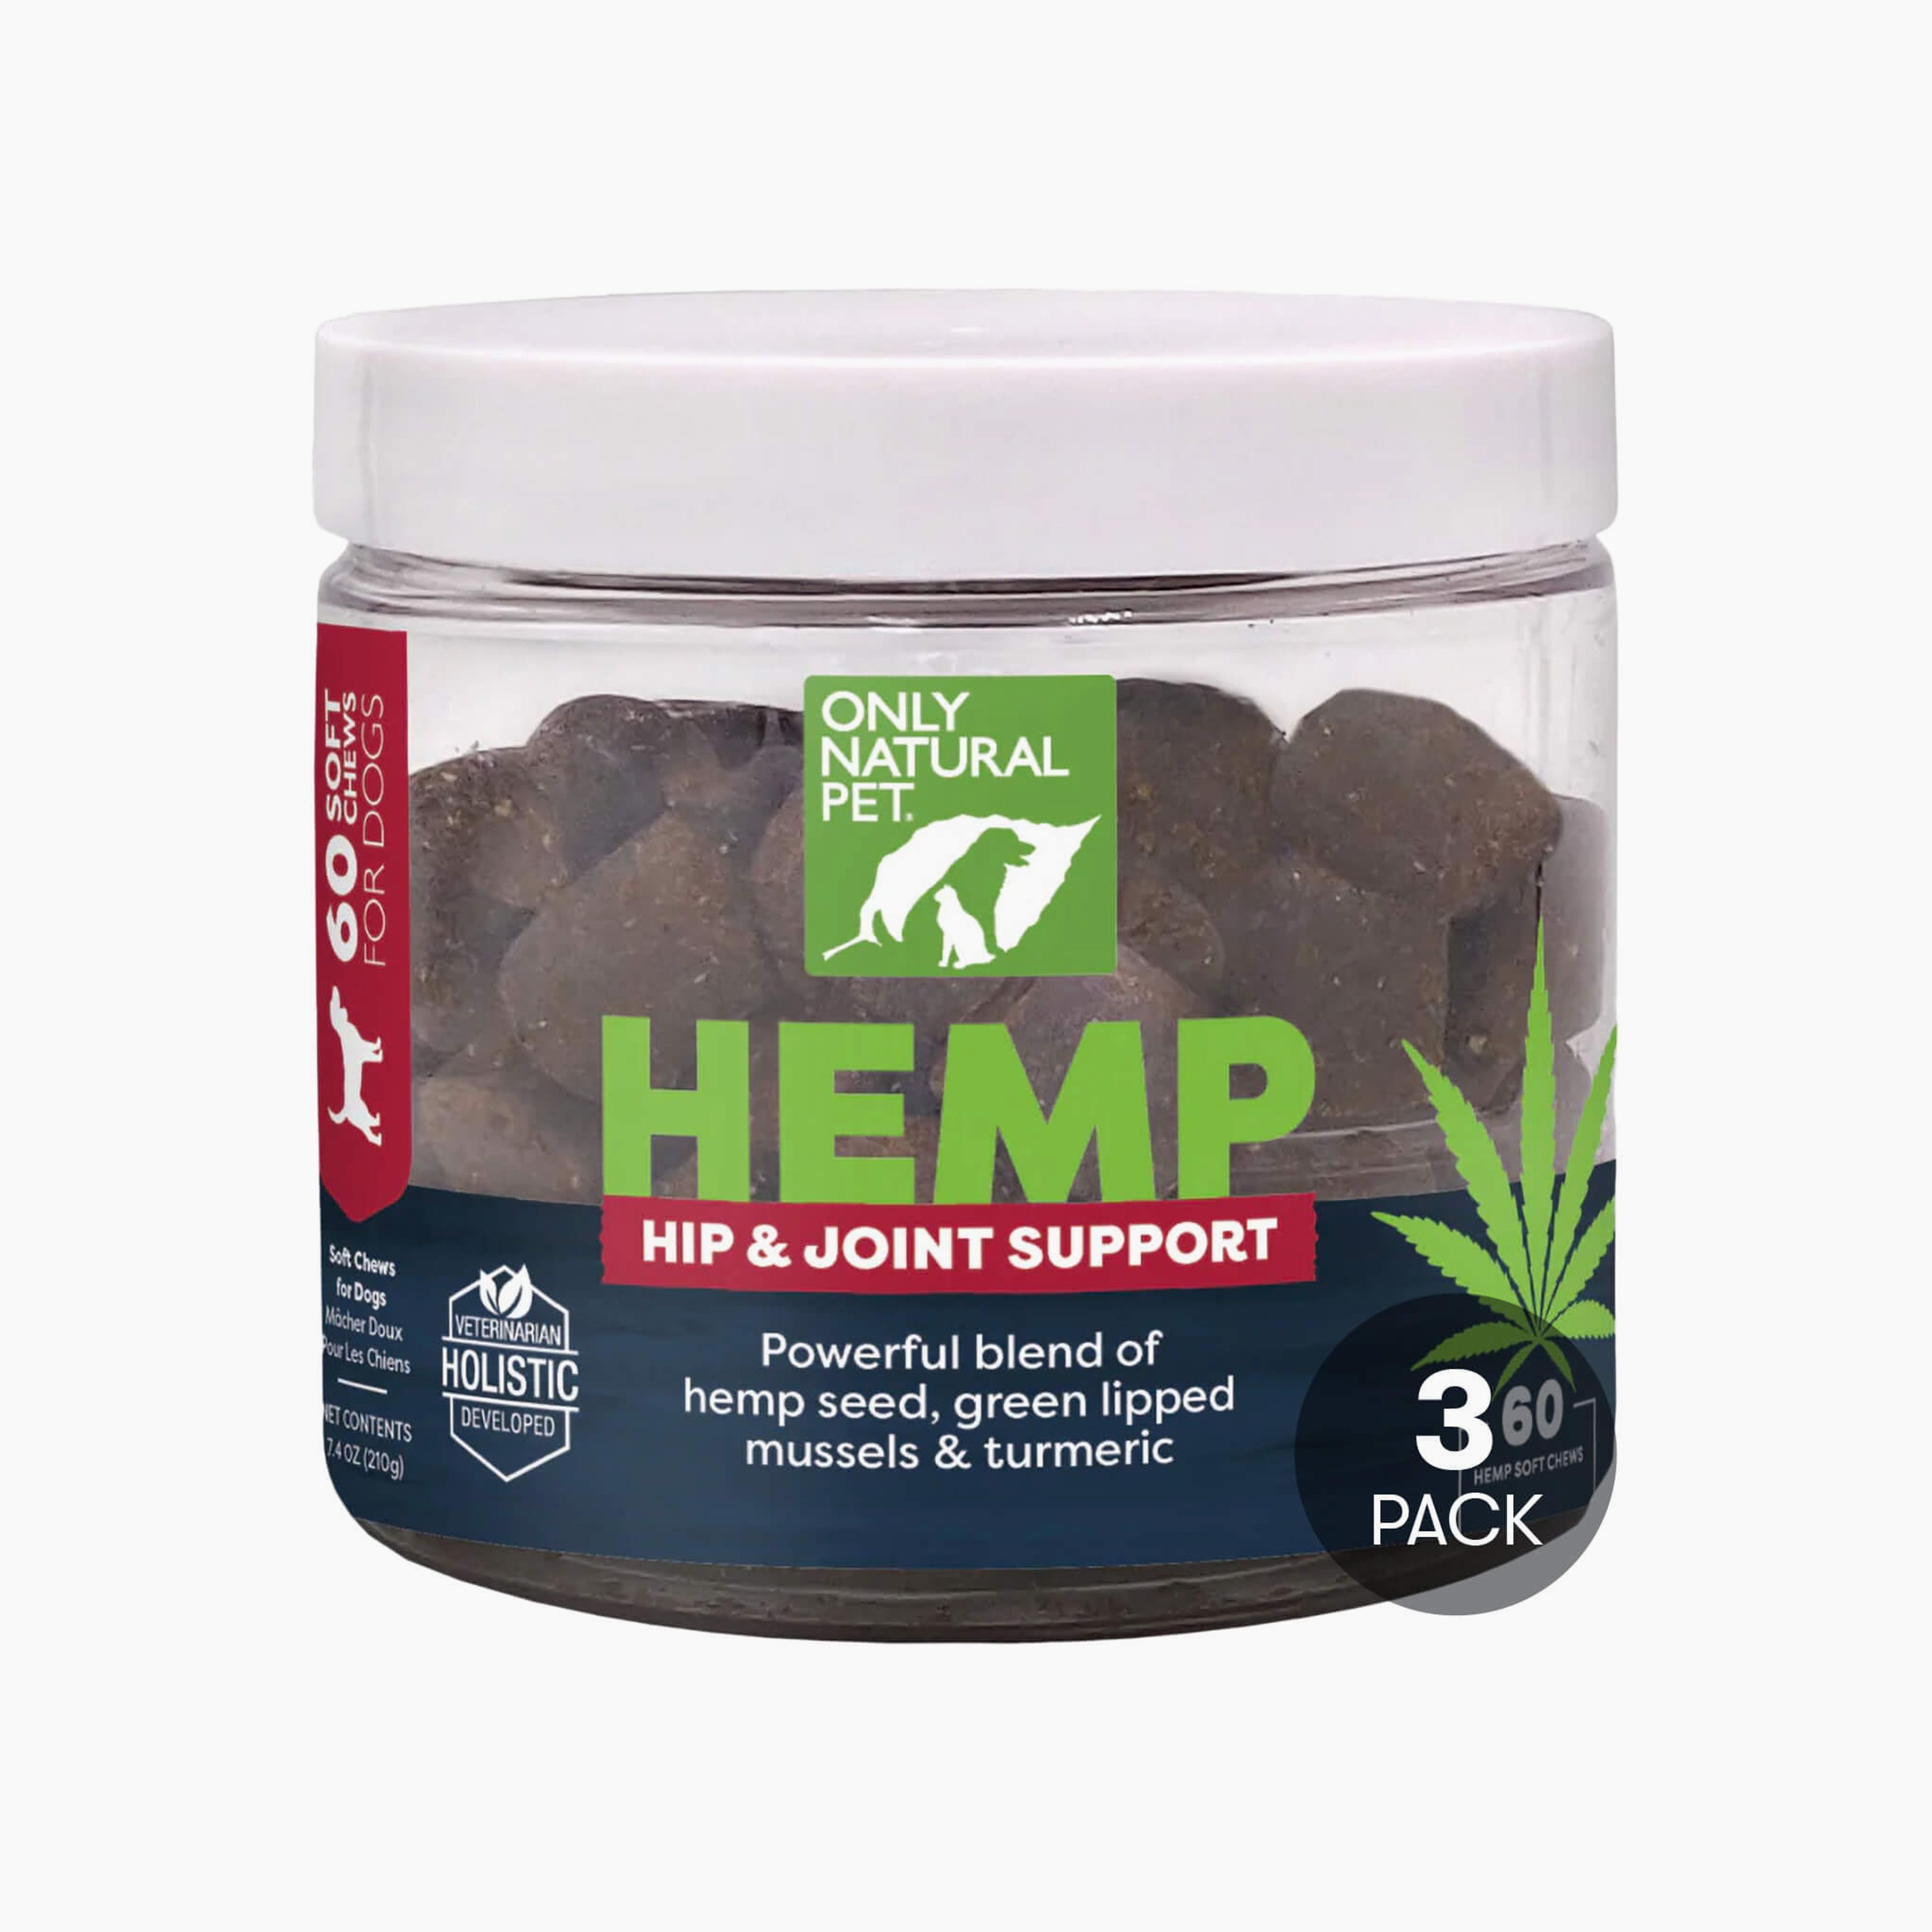 Only Natural Pet Hip & Joint Support Hemp Soft Chew for Dogs